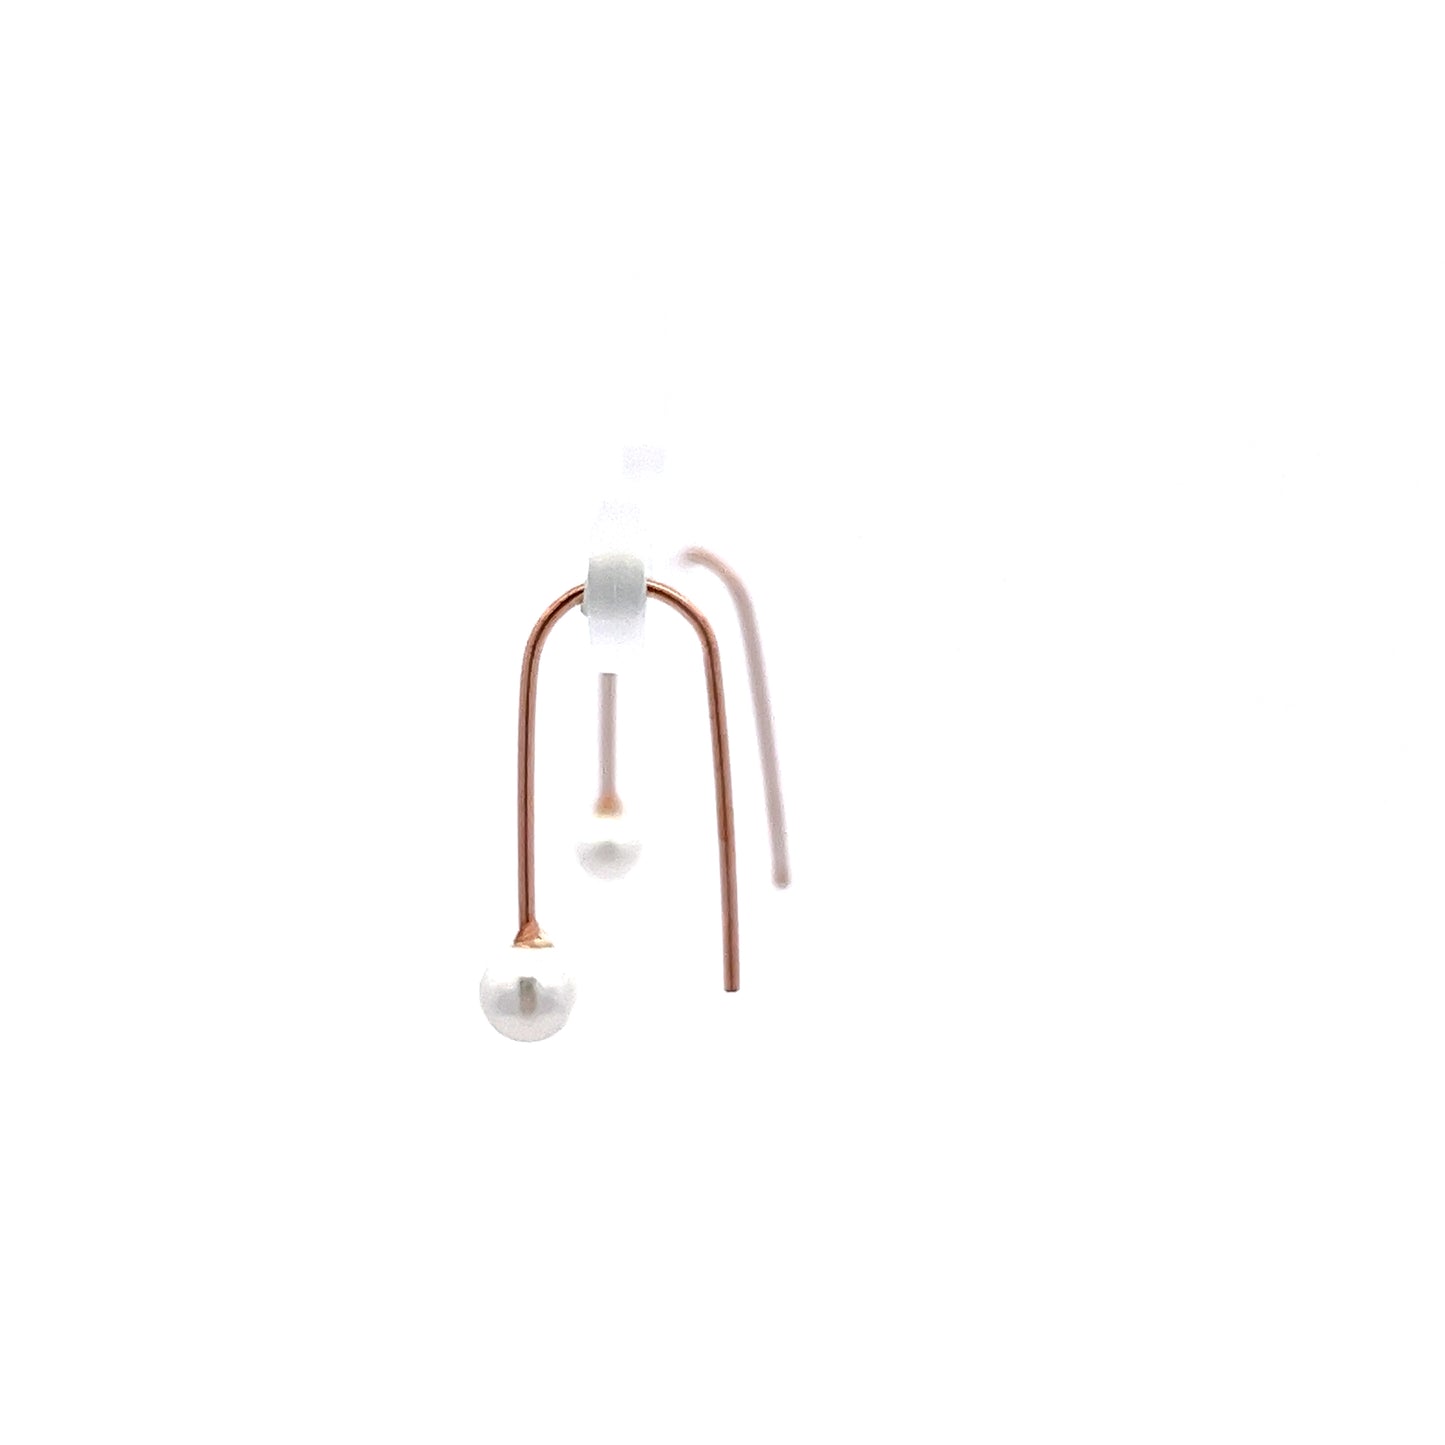 Pearl Cane Earrings in Rose Gold